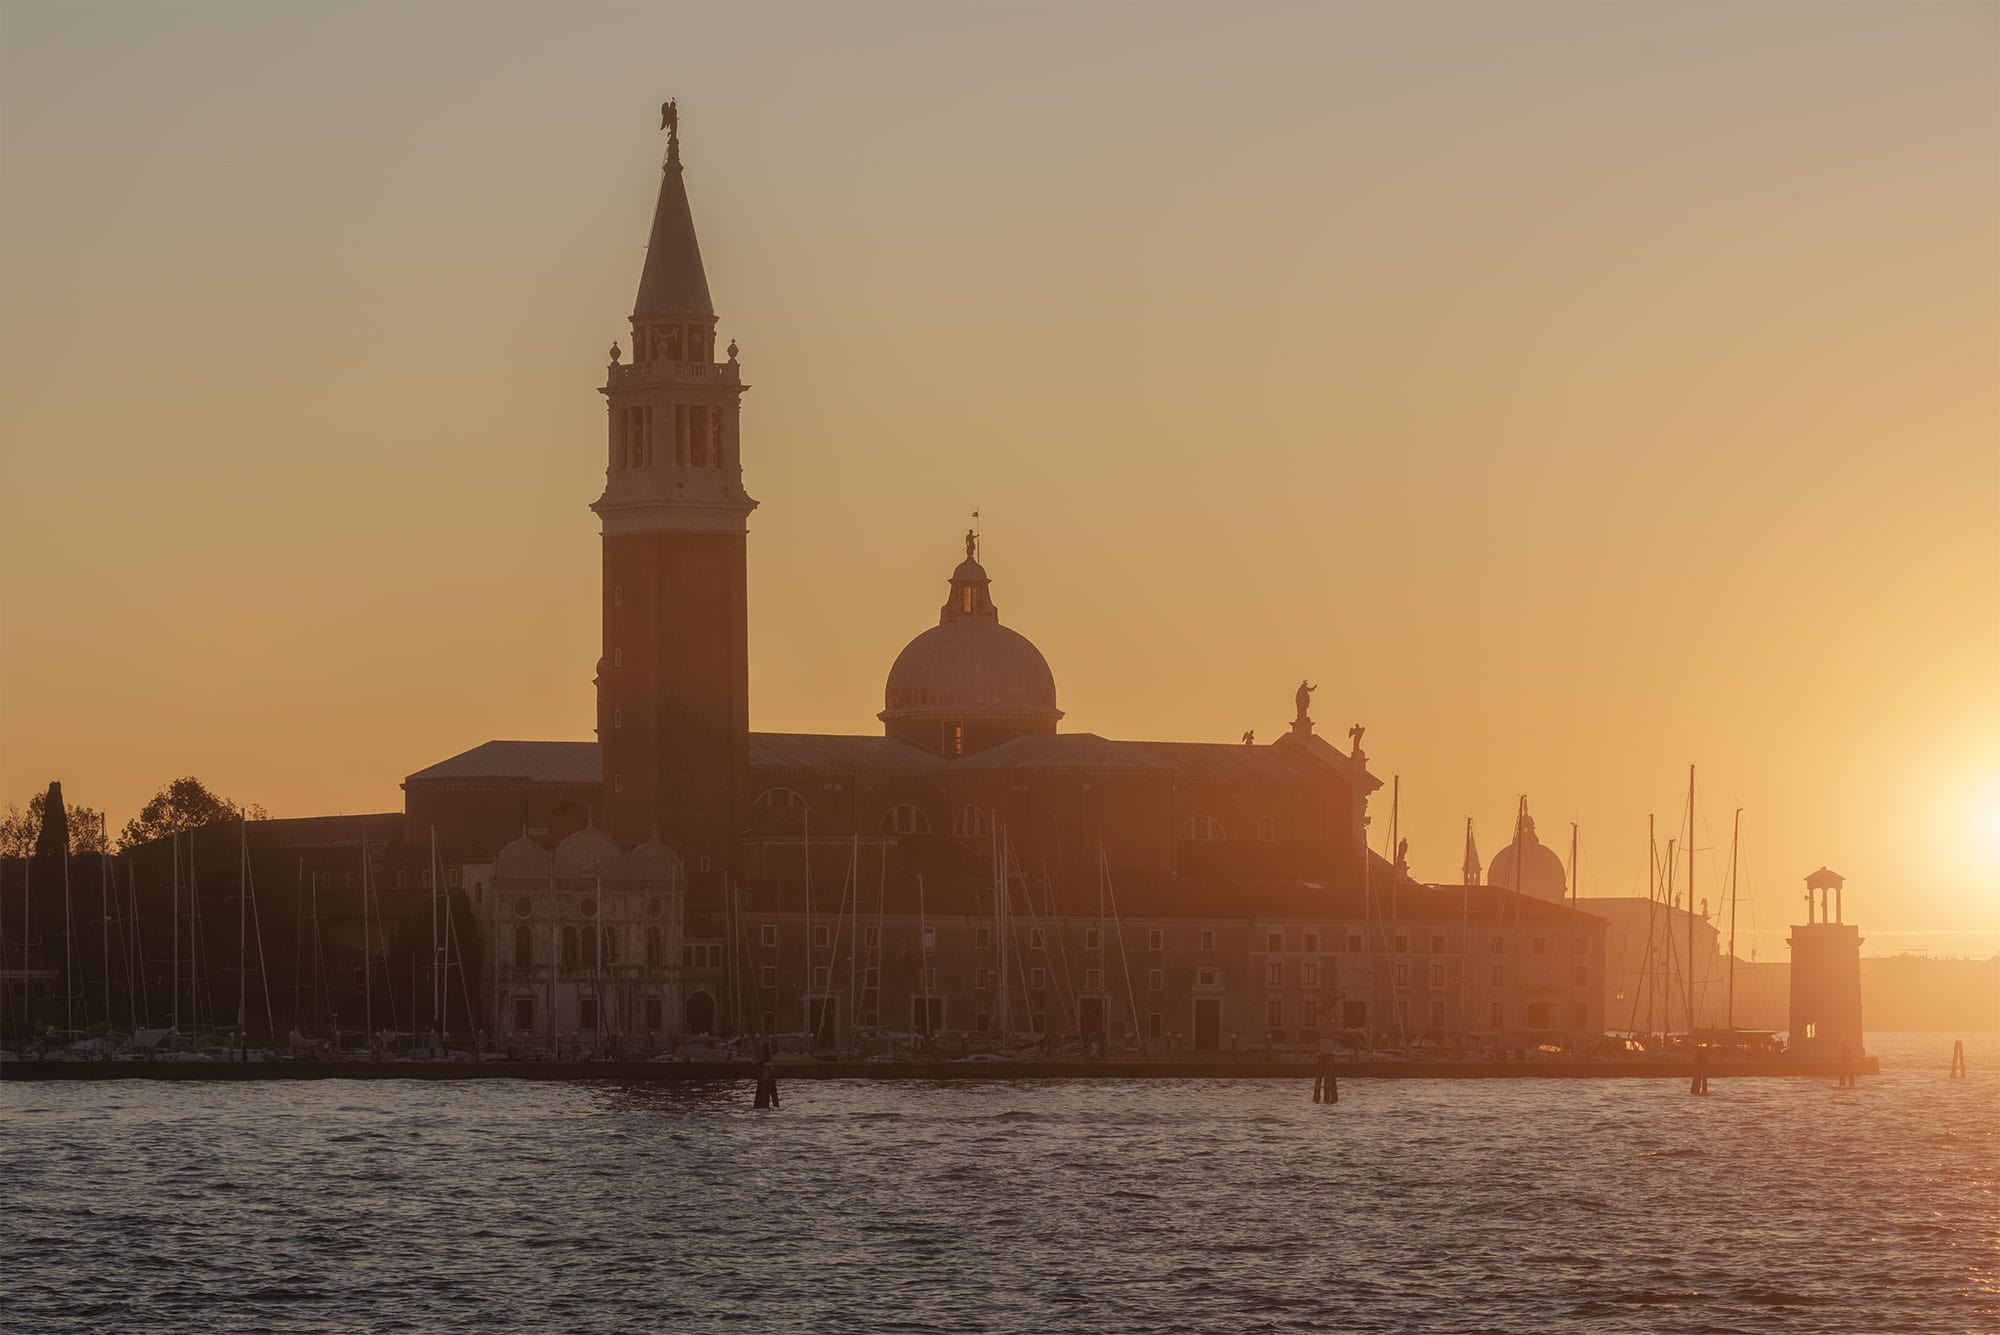 Landscape photography capturing a sunset at Campanile di San Giorgio Maggiore in Venice, Italy, during the golden hour.